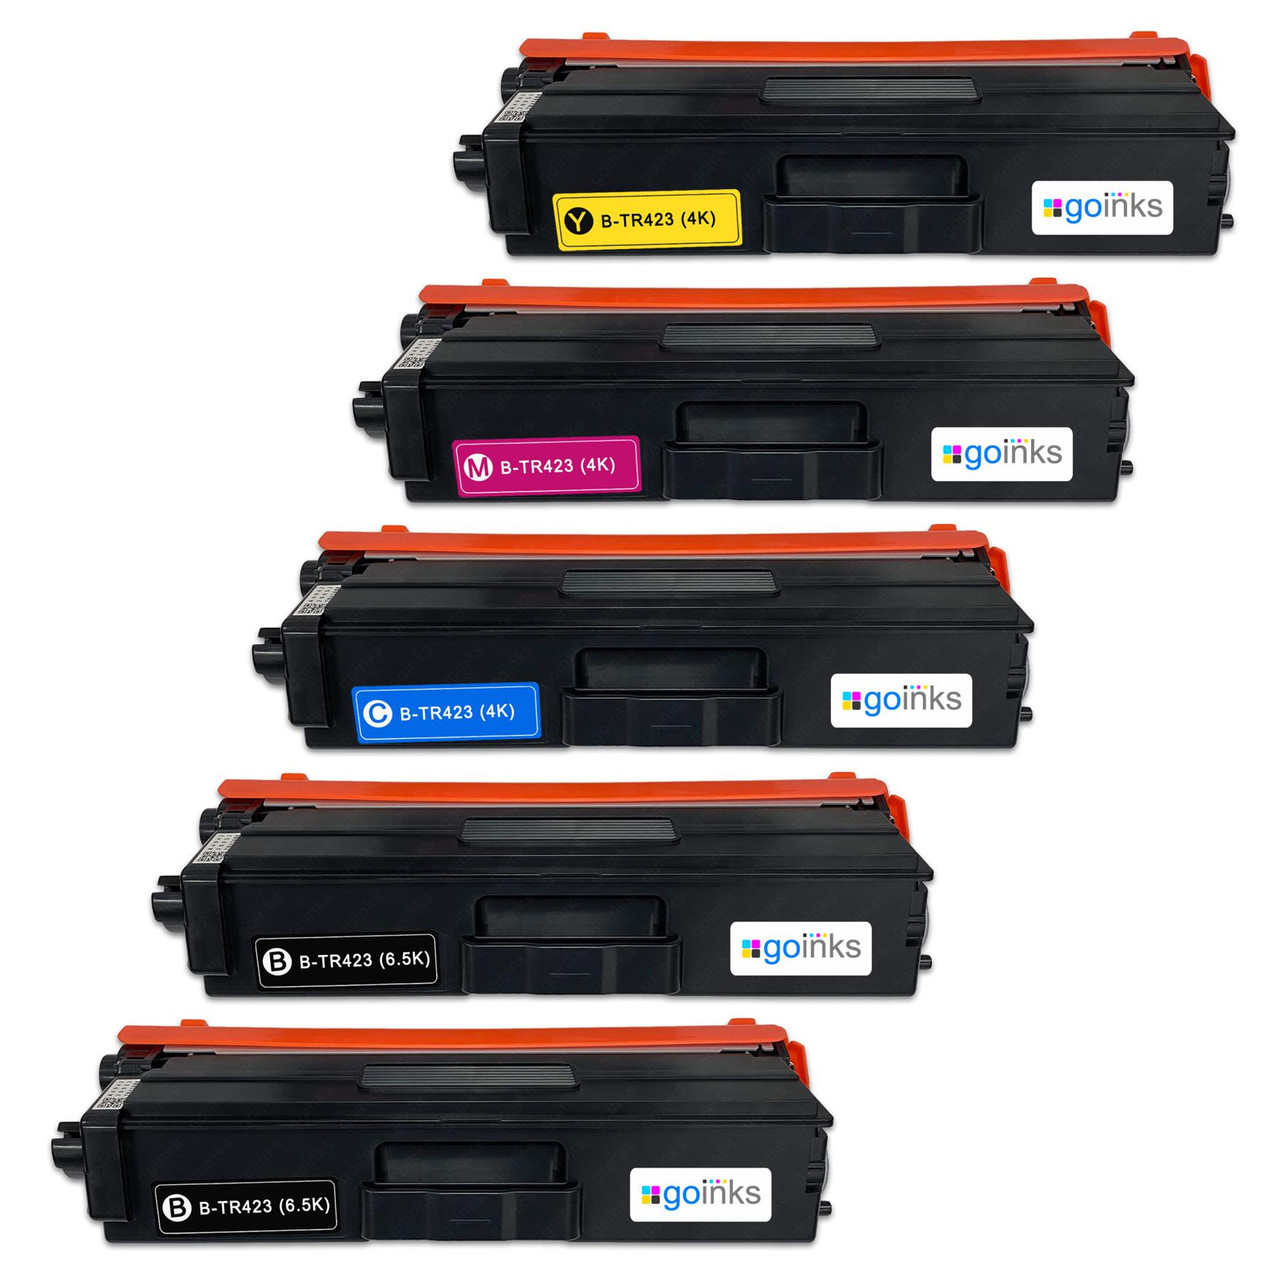 Genuine Brother TN-243 BK/C/Y/M (Select Your Toner Cartridges